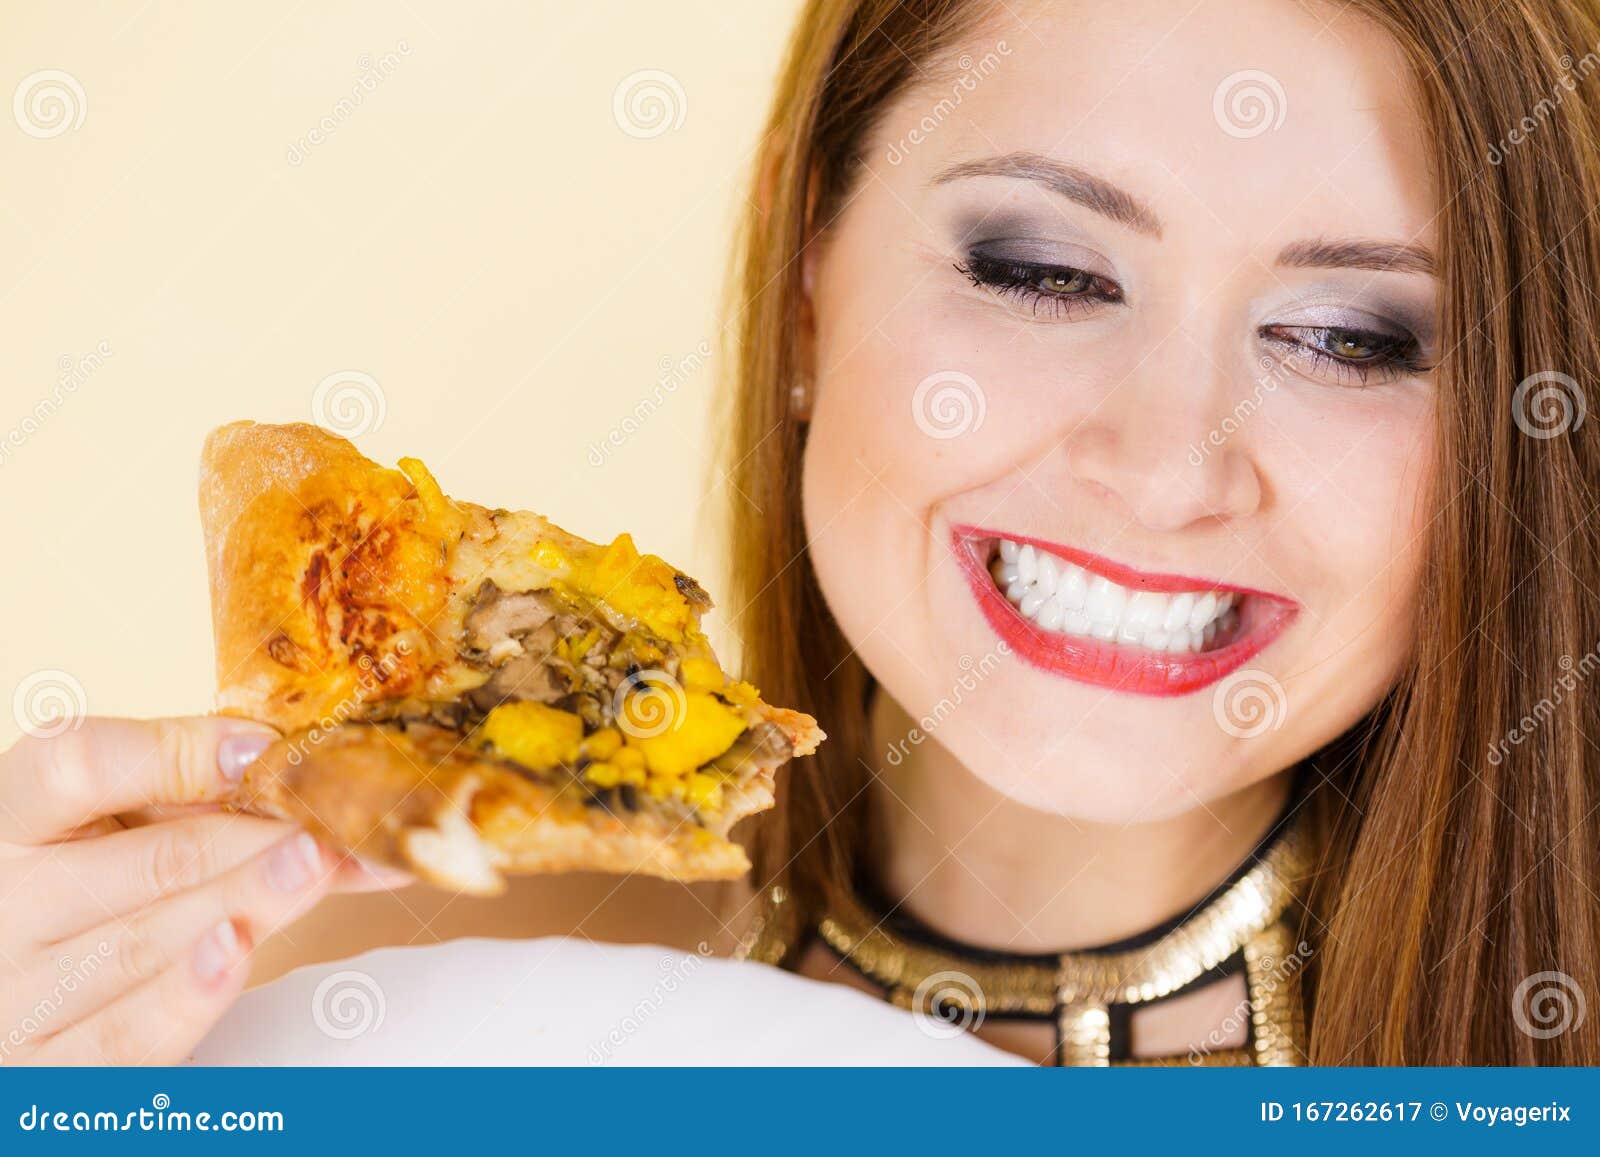 Woman Eating Hot Pizza Slice Stock Image Image Of Adult Bit